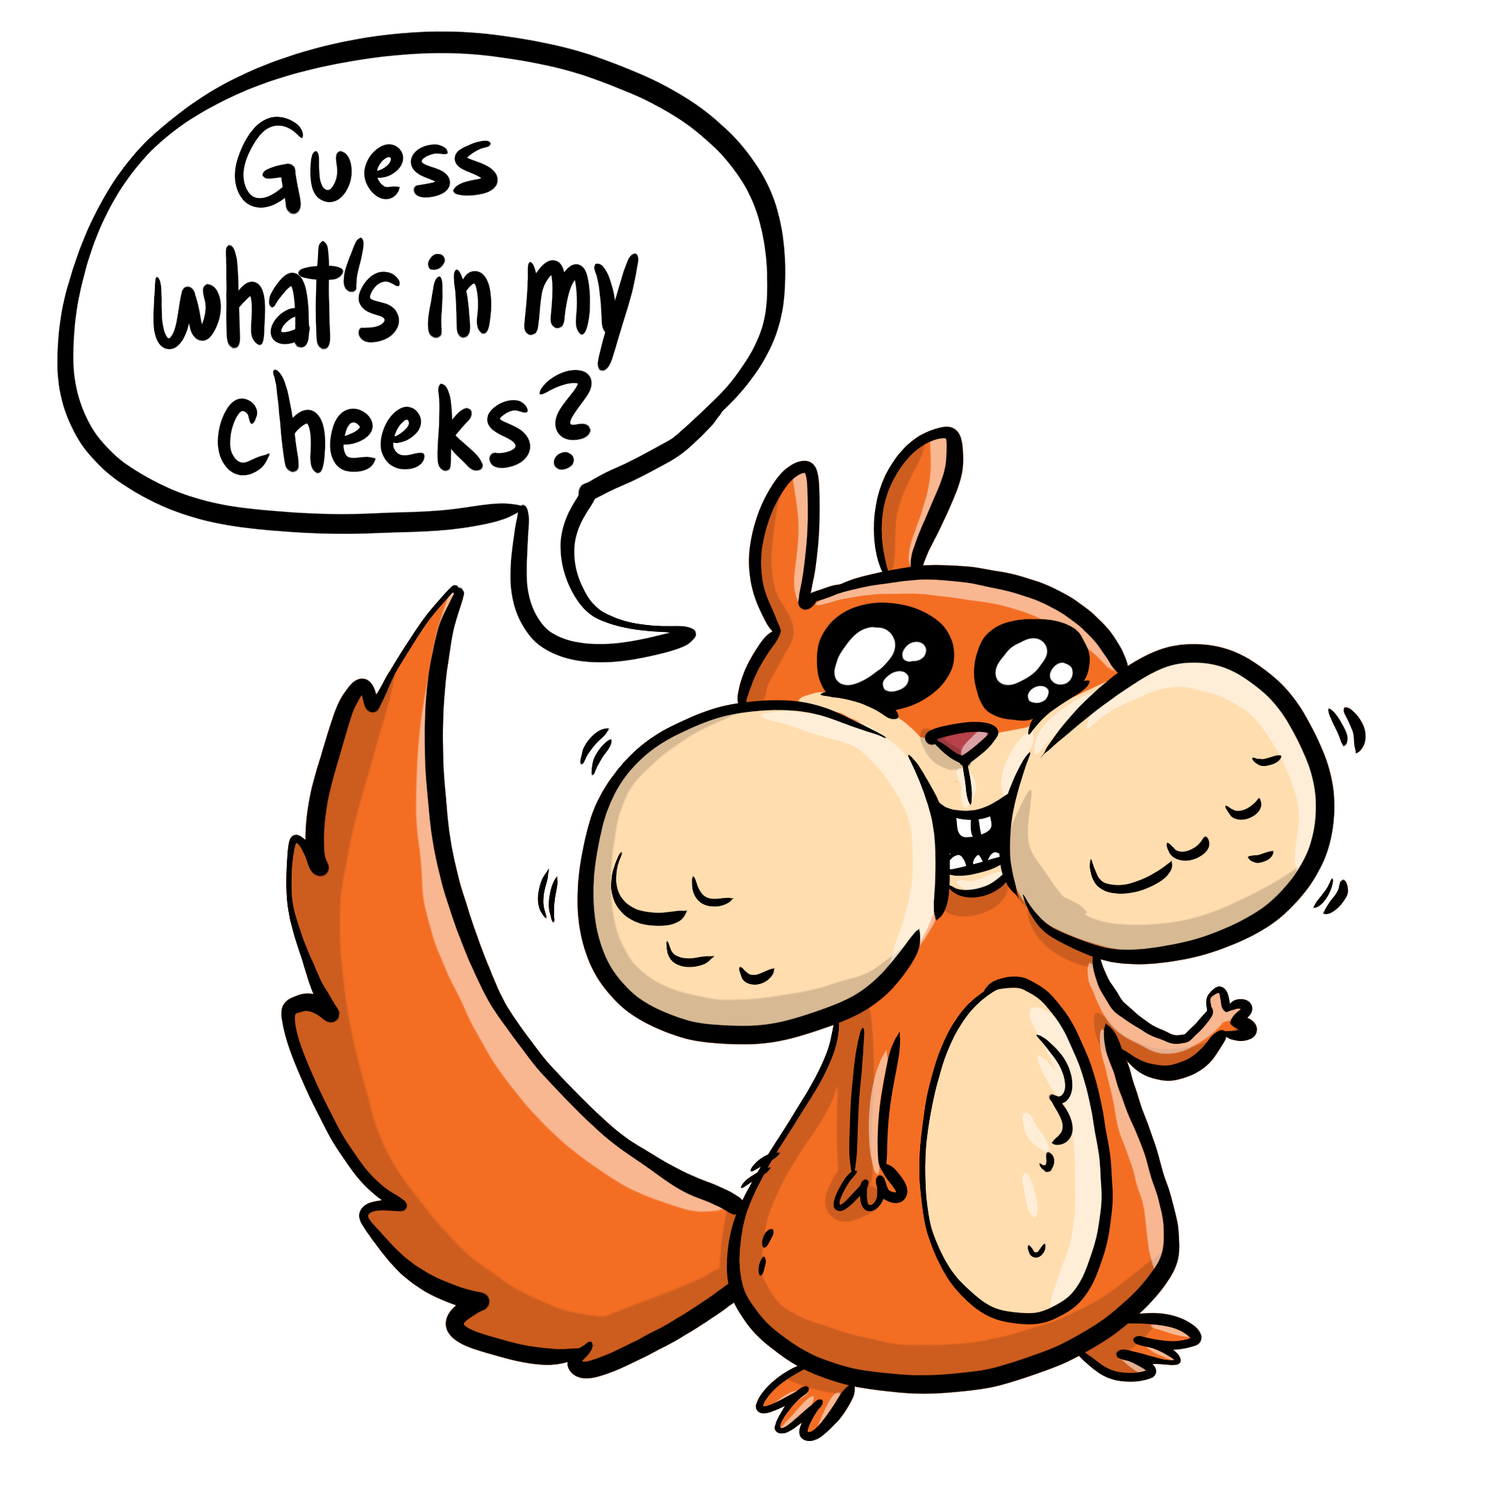 What's in Hoarder Squirrel's Cheeks?